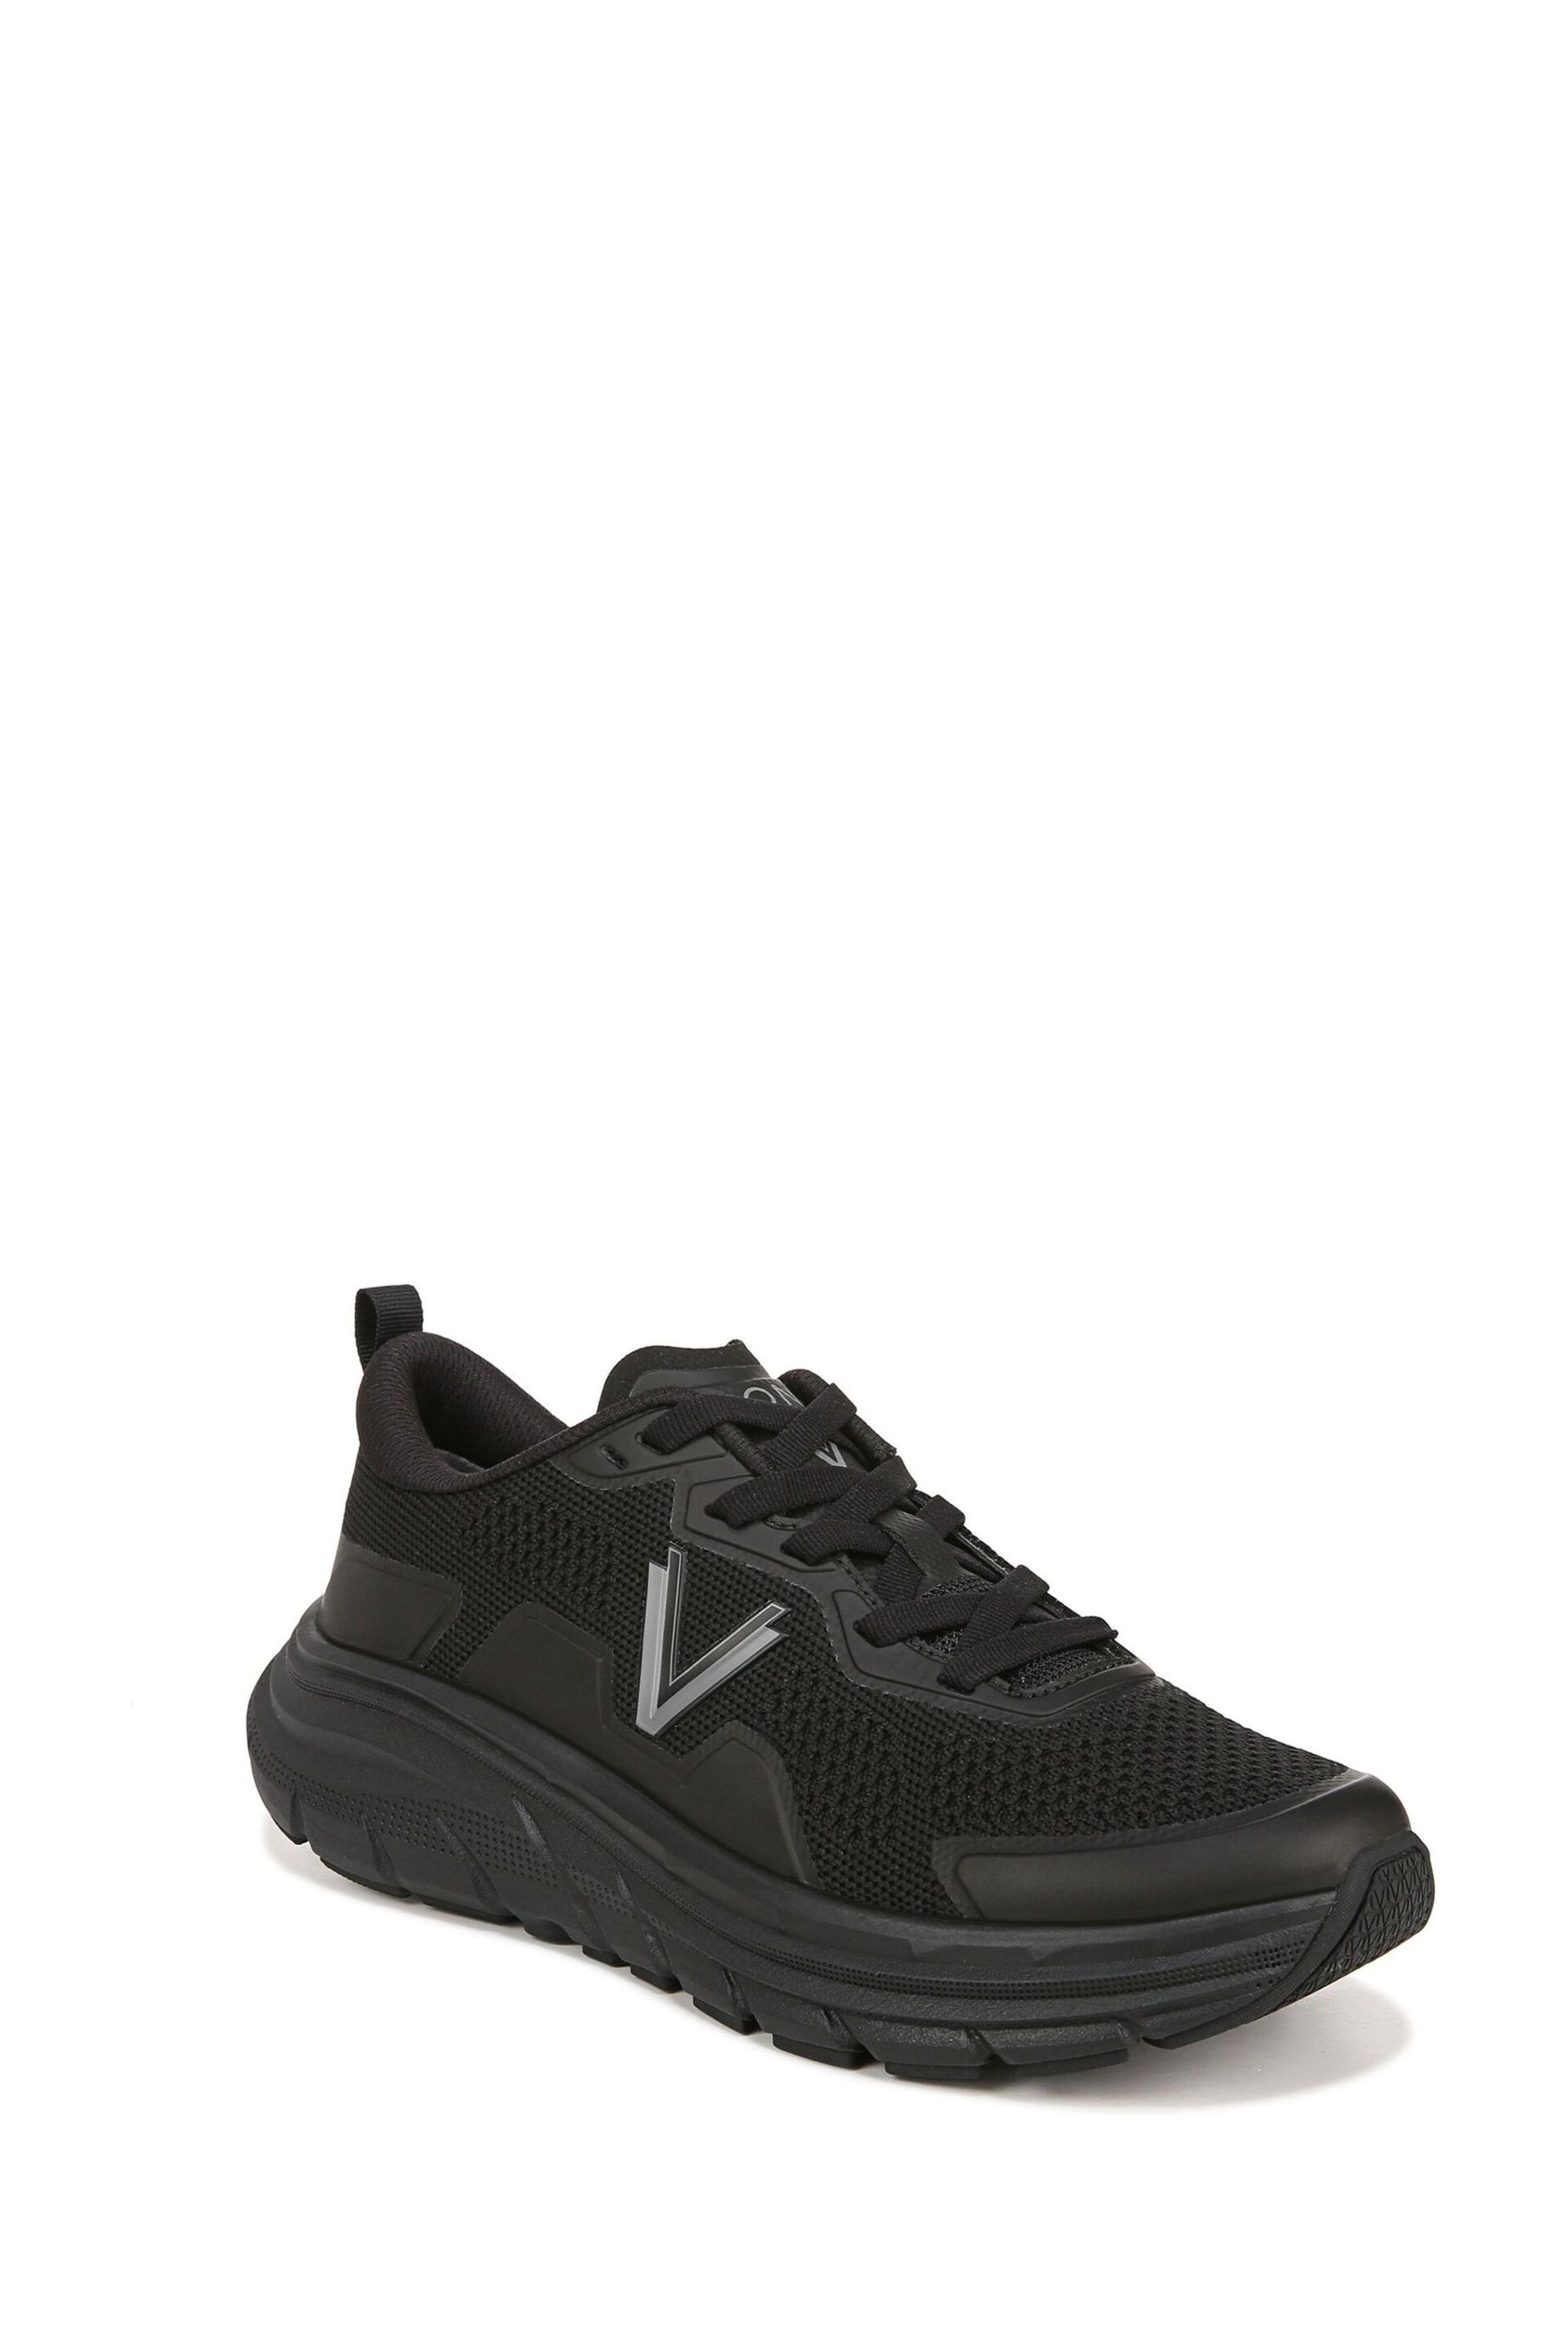 Vionic Walk Max Wide Fit Trainers - Image 3 of 7